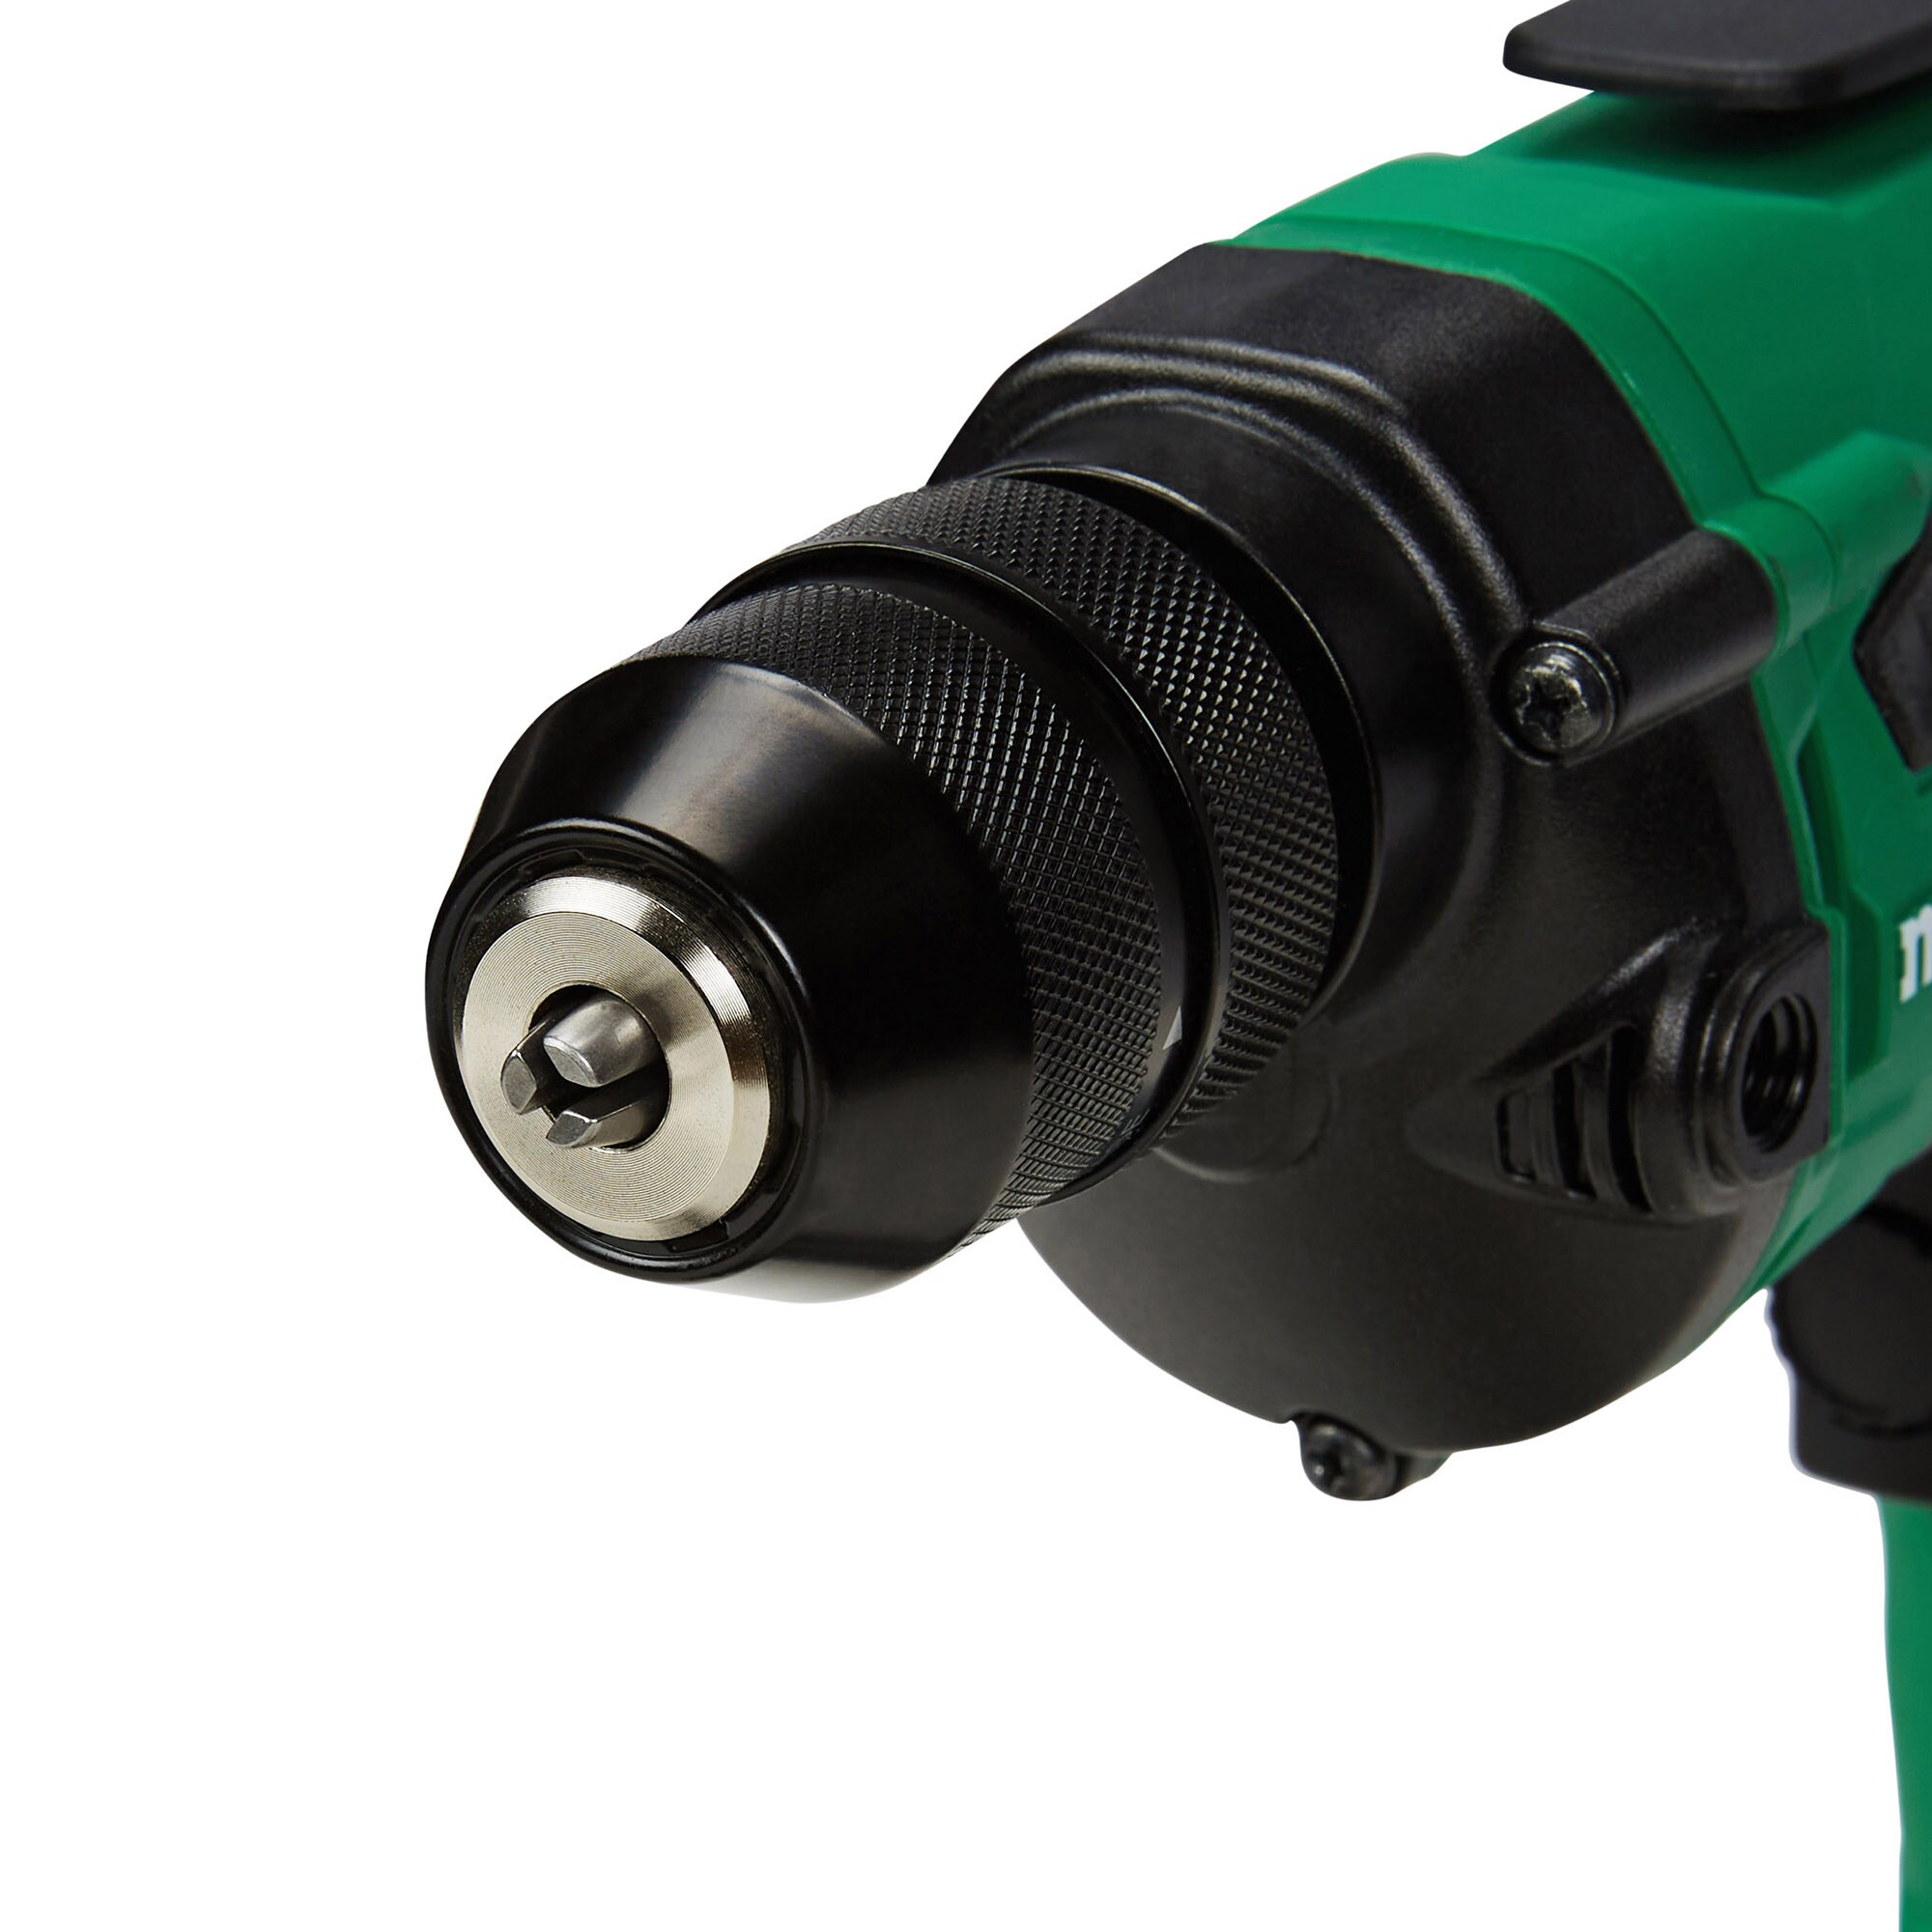 Metabo HPT 3/8-in Keyless Corded Drill